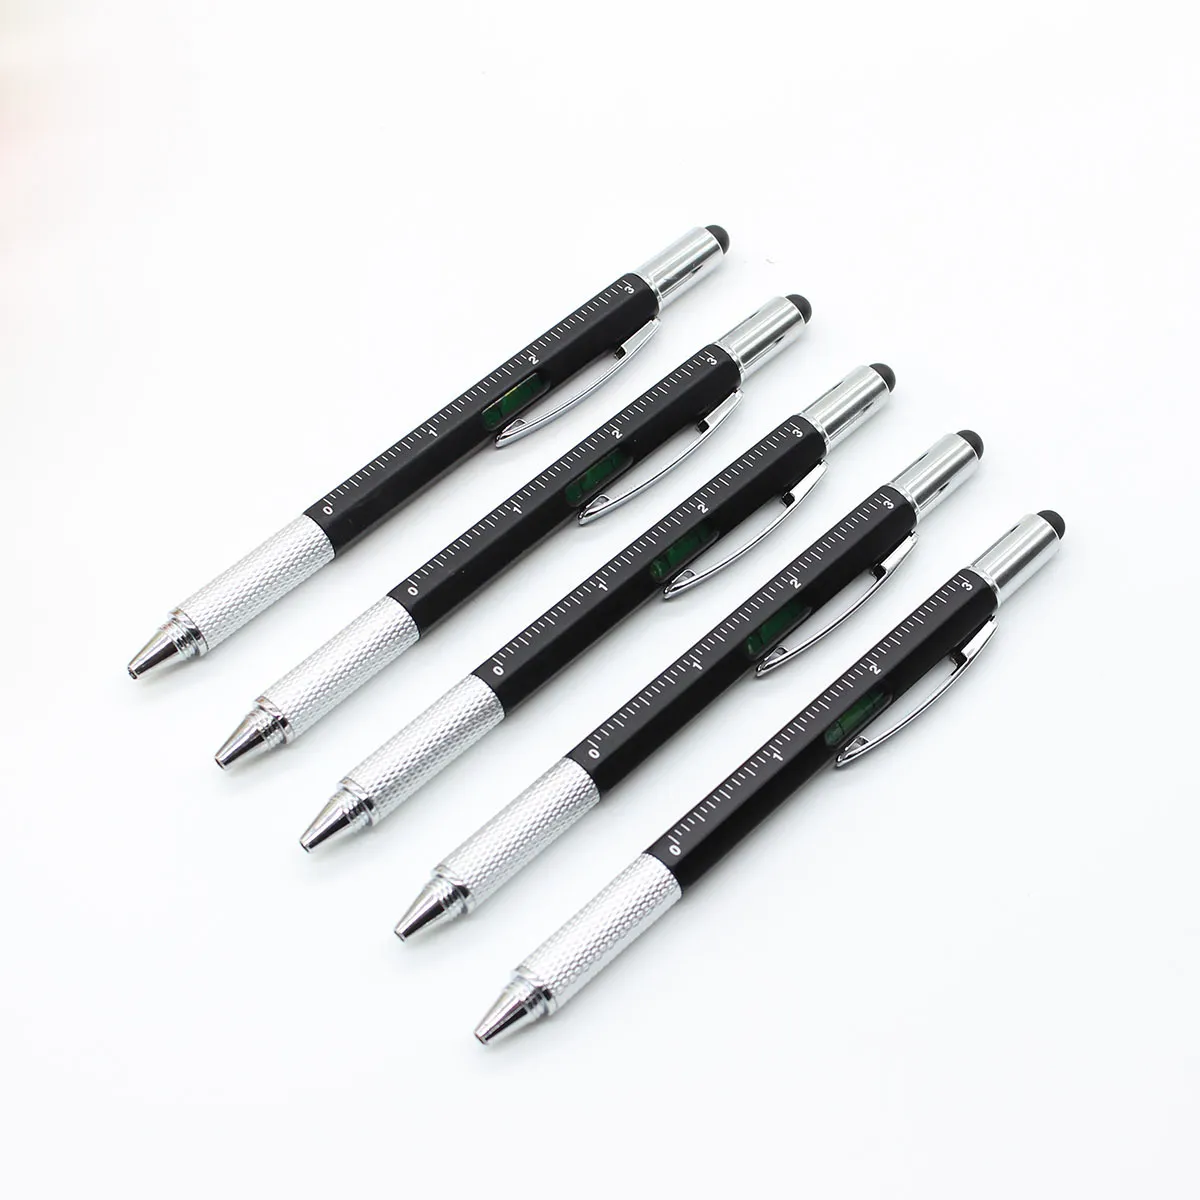 Plastic Ballpoint Pen 6 in 1 Tool Screwdriver Ruler Spirit Level Multi-function Touch Screen Stylus Pen out door tools